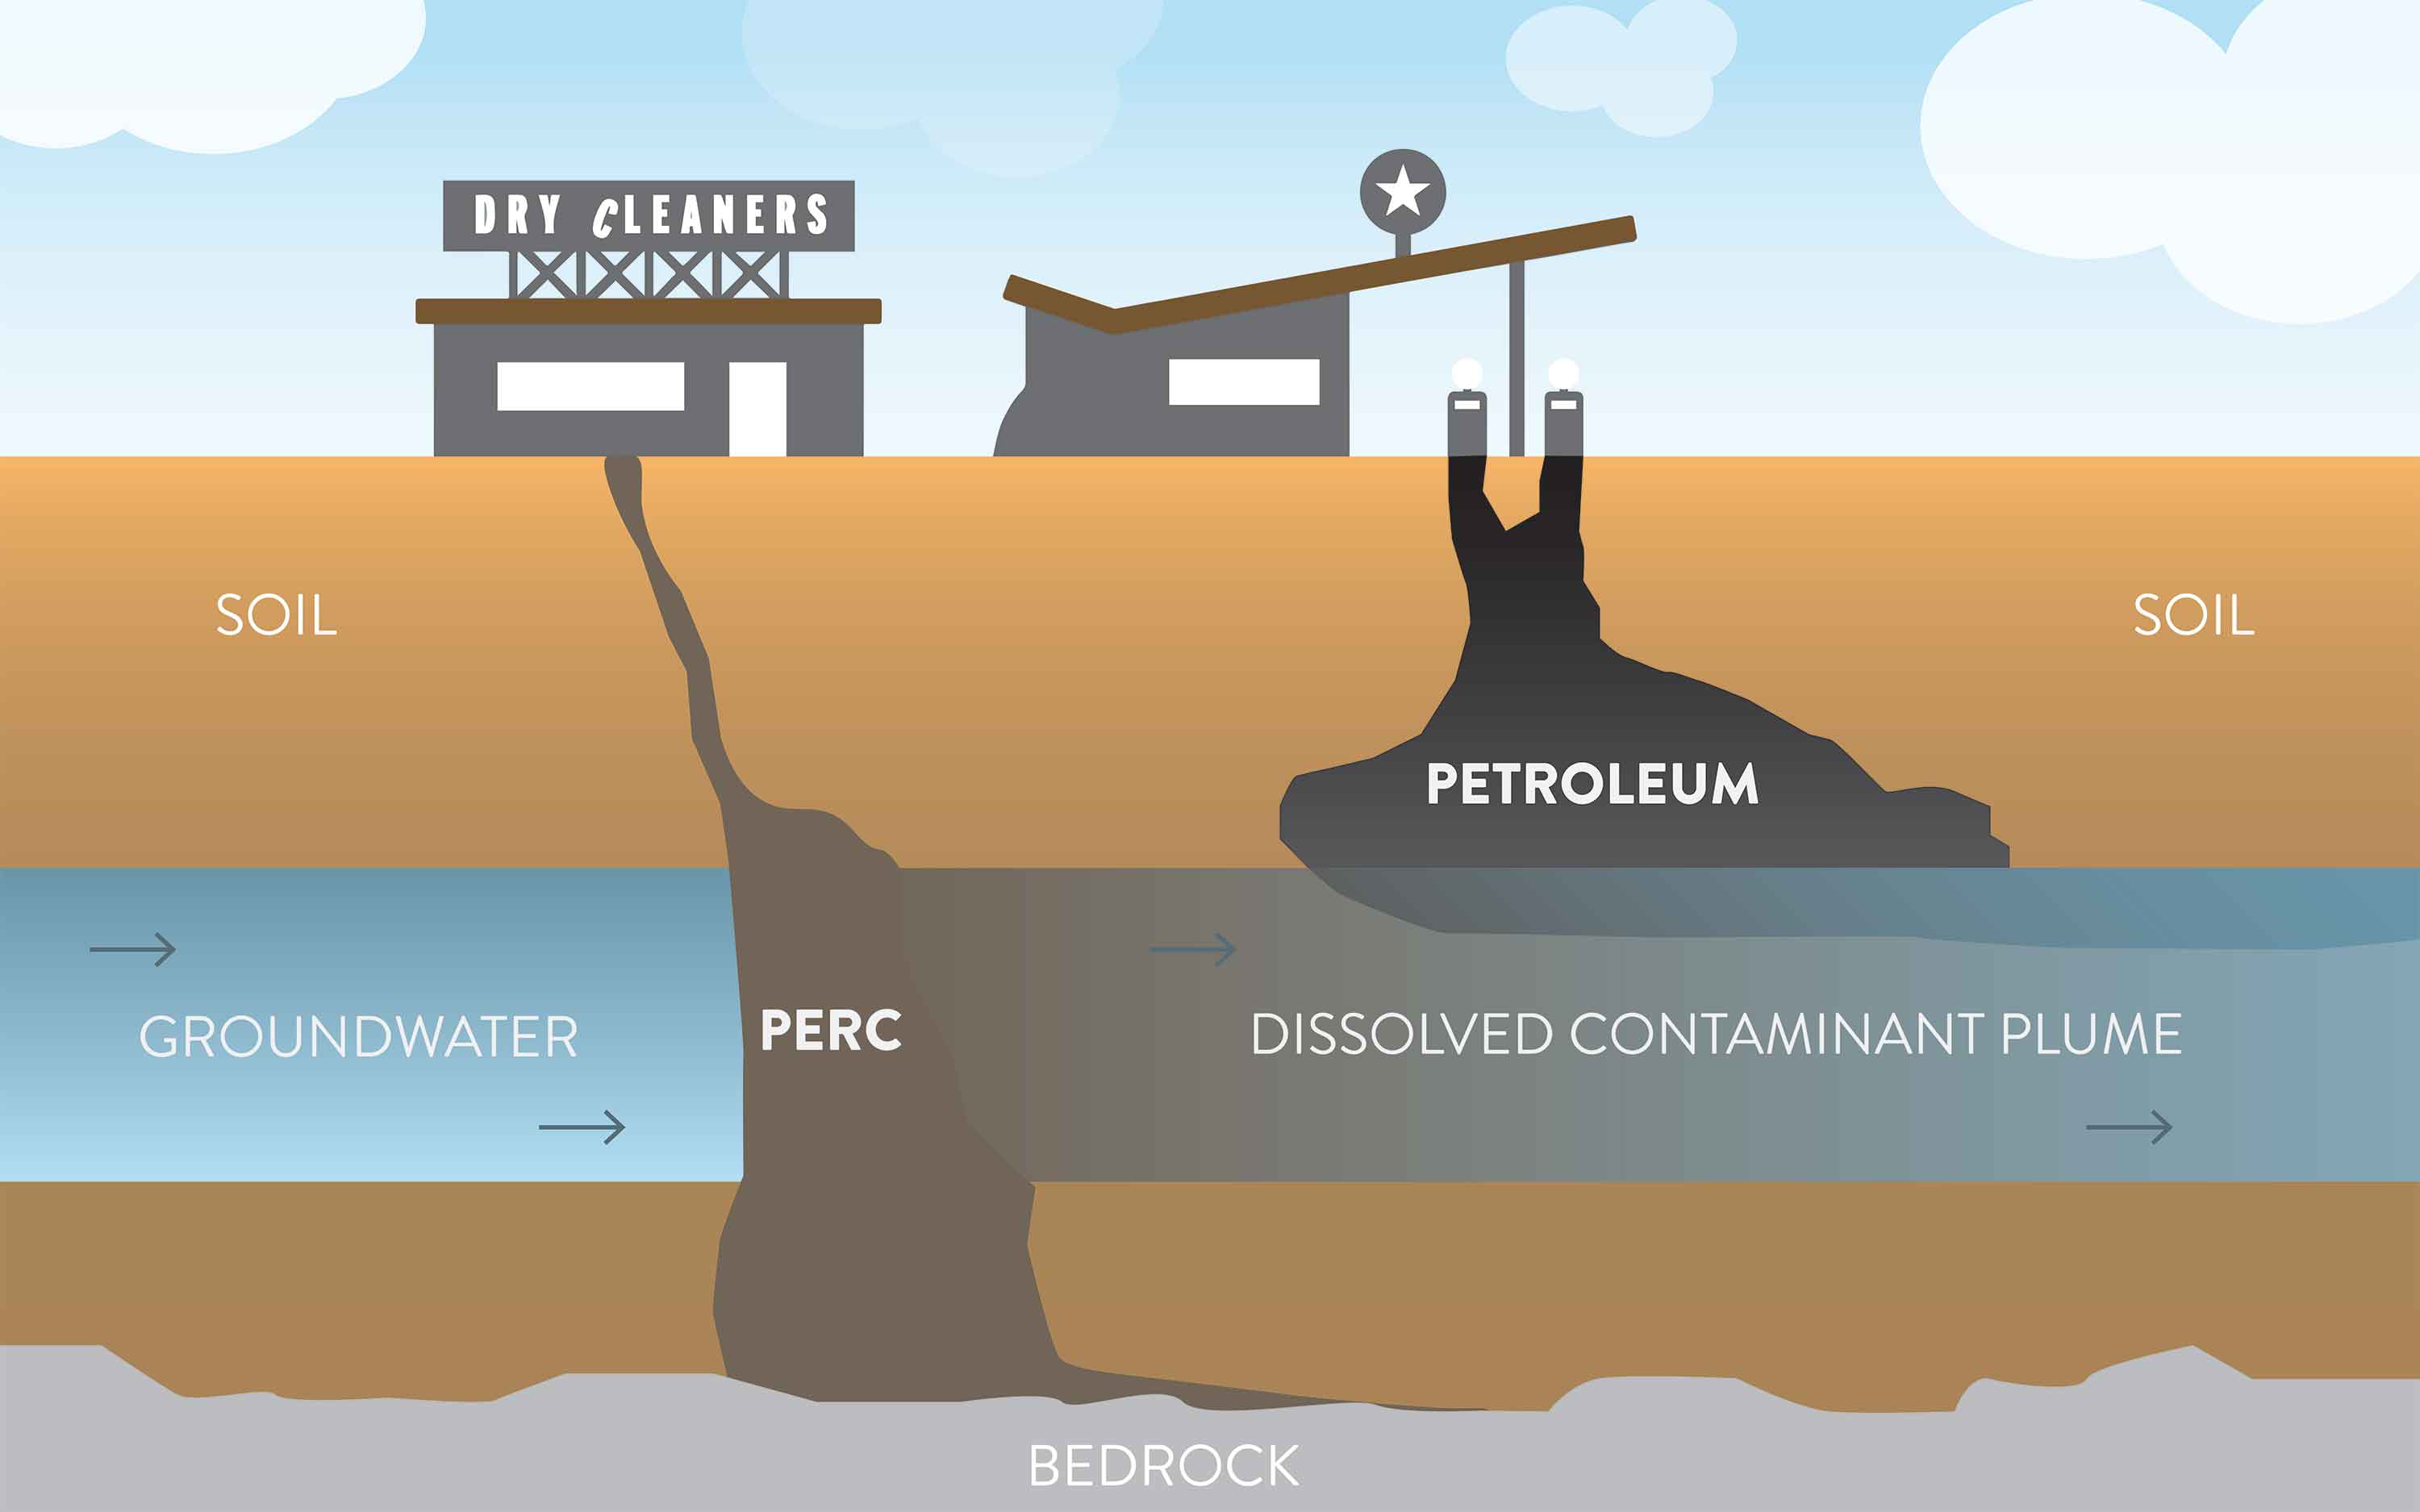 Illustration of perc contamination sinking through the groundwater to the bedrock while the petroleum sits on top of the groundwater